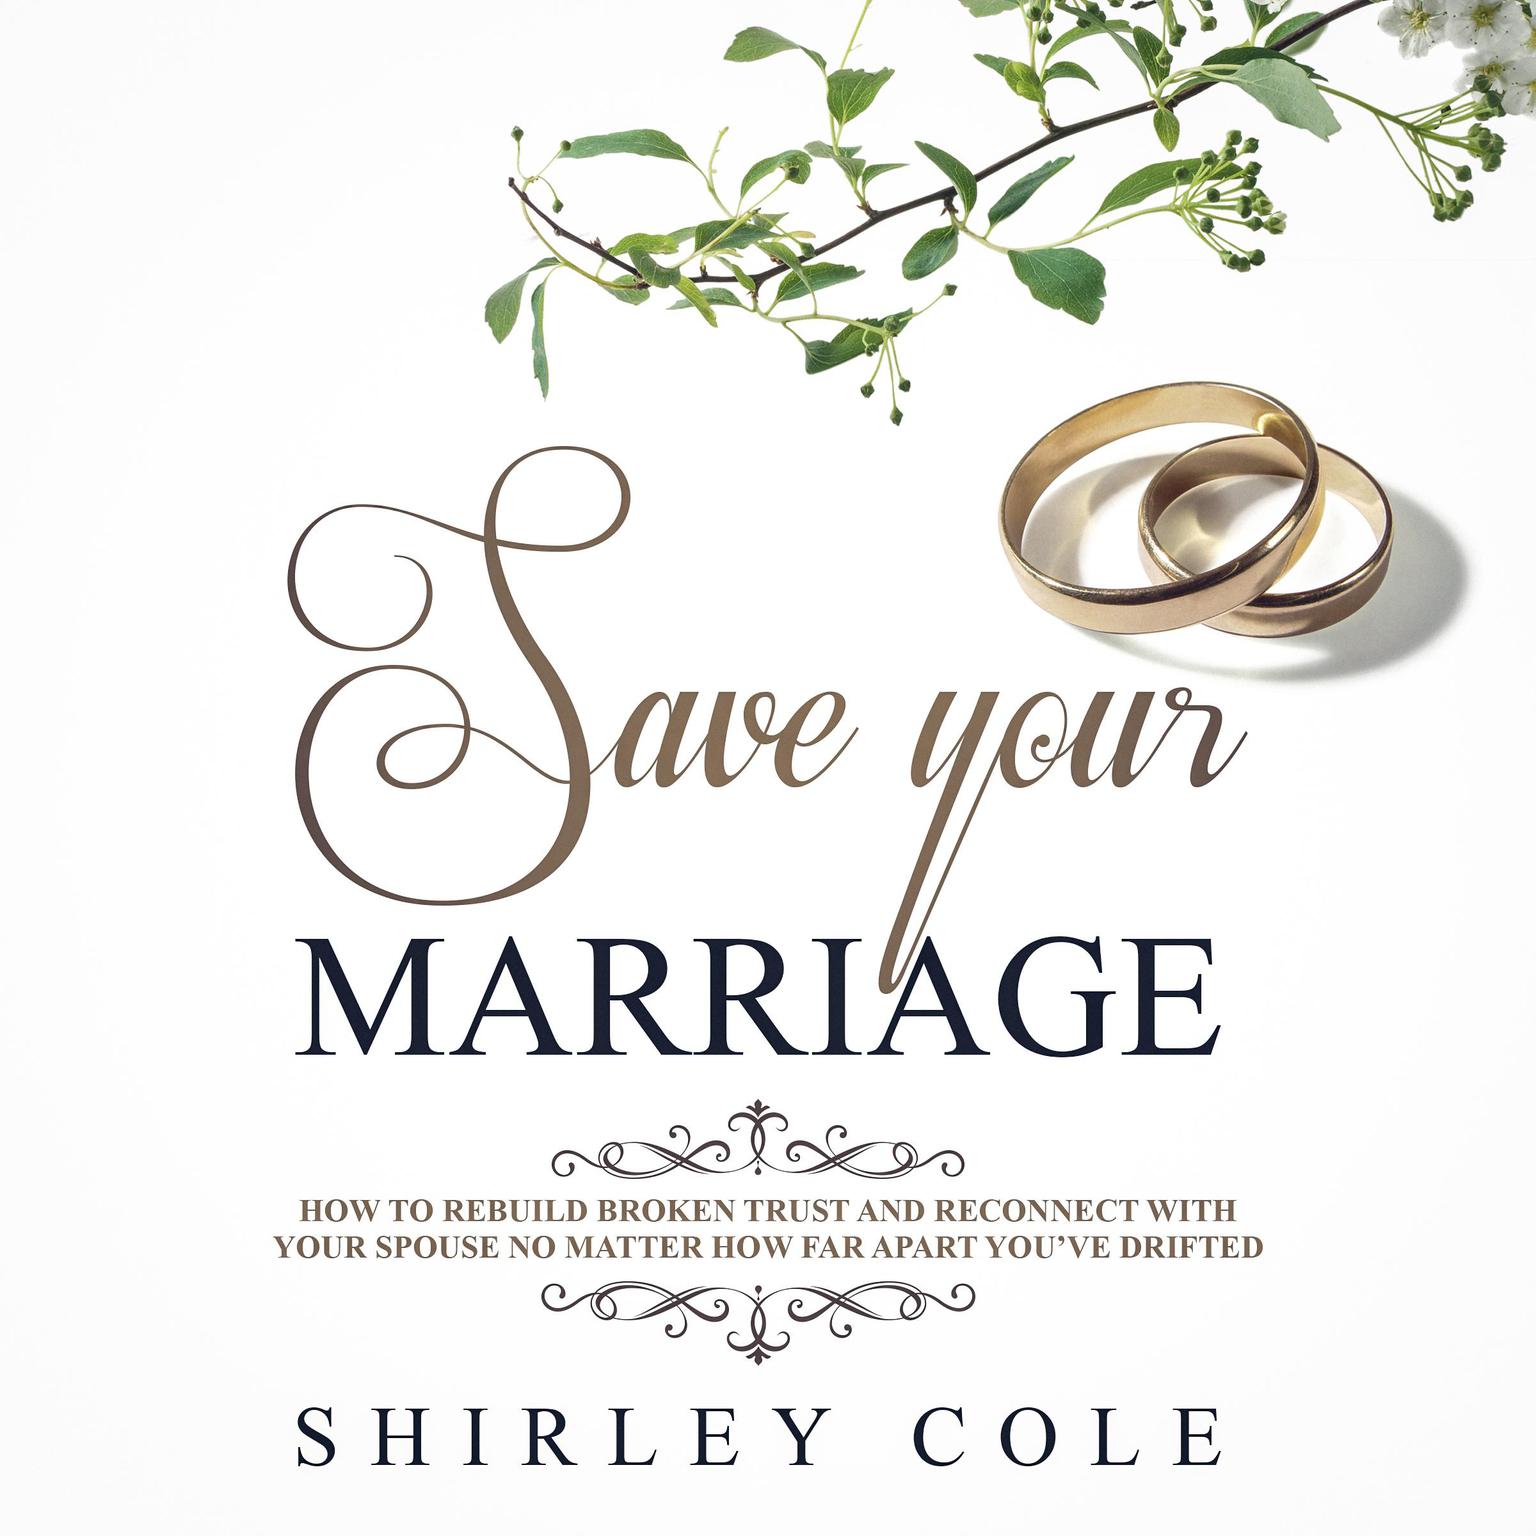 Save Your Marriage: How To Rebuild Broken Trust And Reconnect With Your Spouse No Matter How Far Apart You’ve Drifted Audiobook, by Shirley Cole